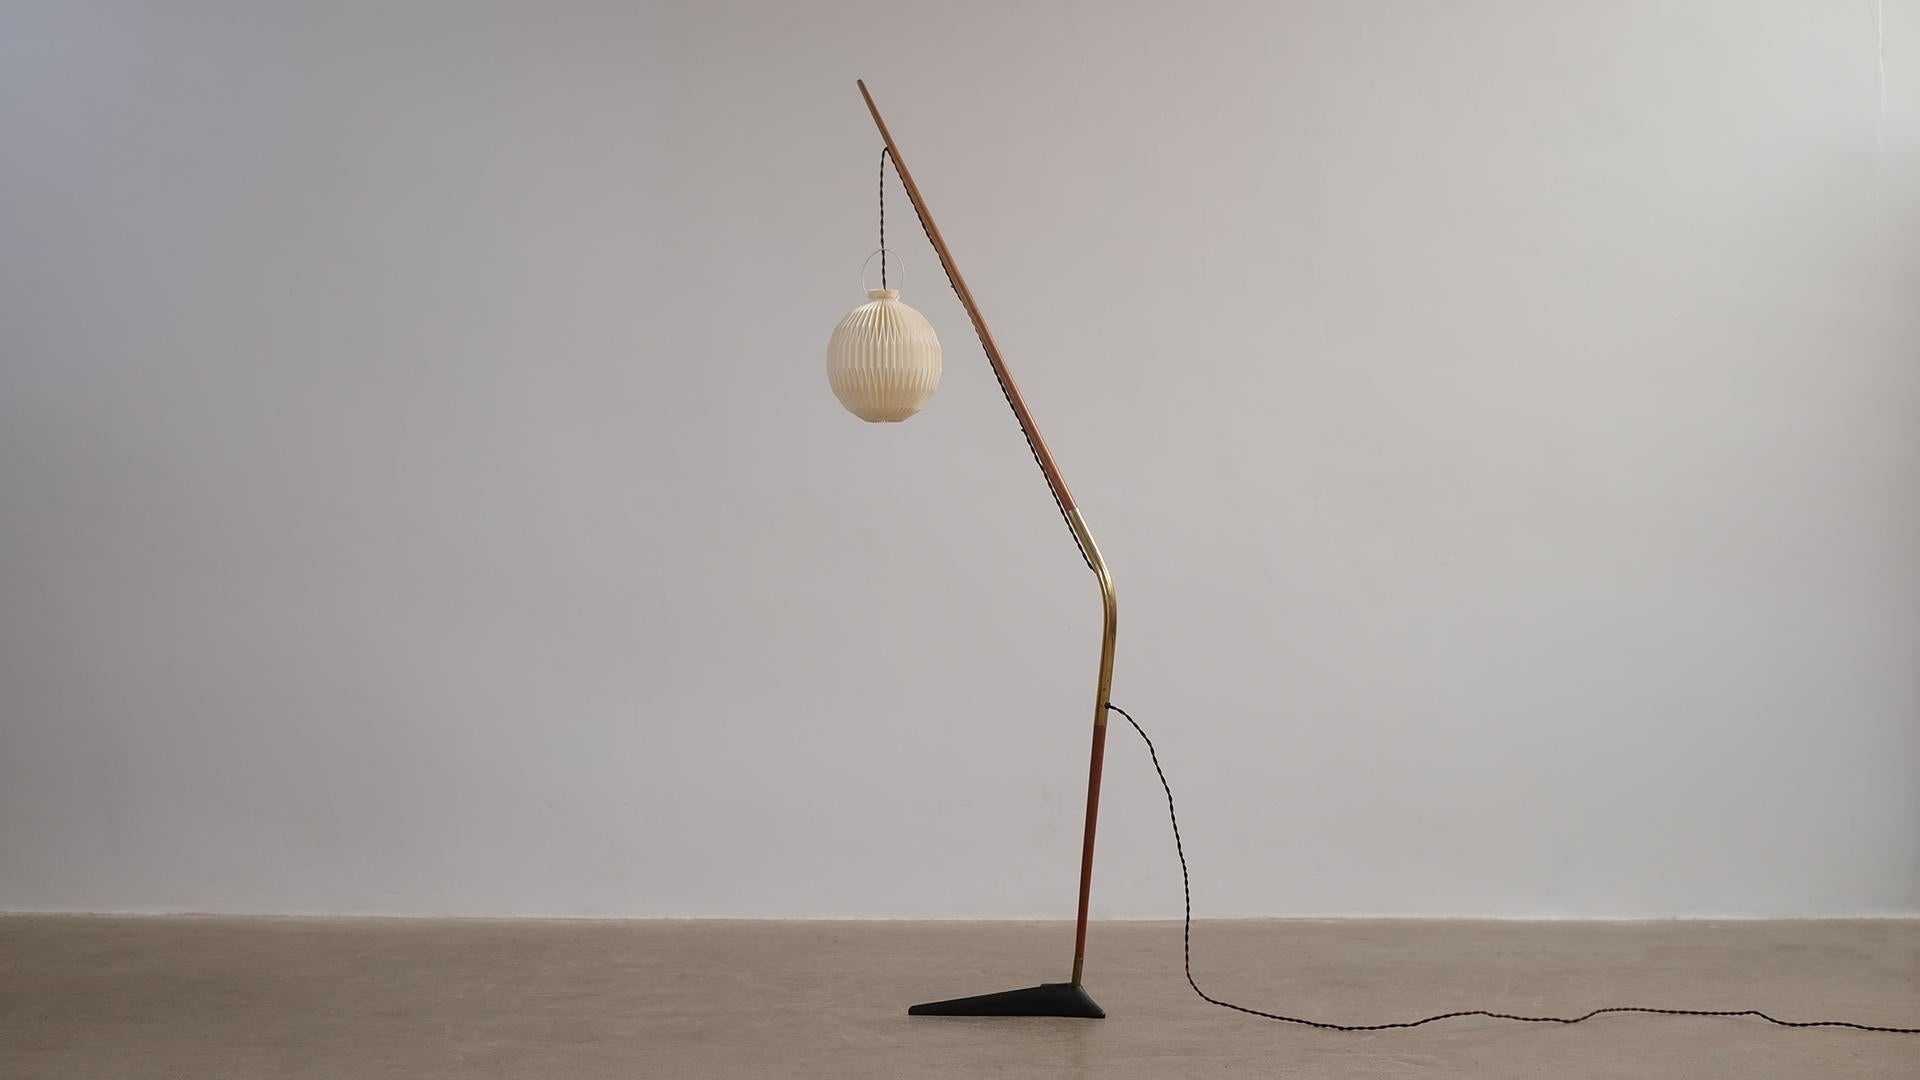 Rare and beautiful 'Fishing Pole' floor light designed by Svend Aage Holm Sorensen for Holm Sorensen and Co, Denmark. Cast iron base with teak and brass shaft. Shade by Le Klint.